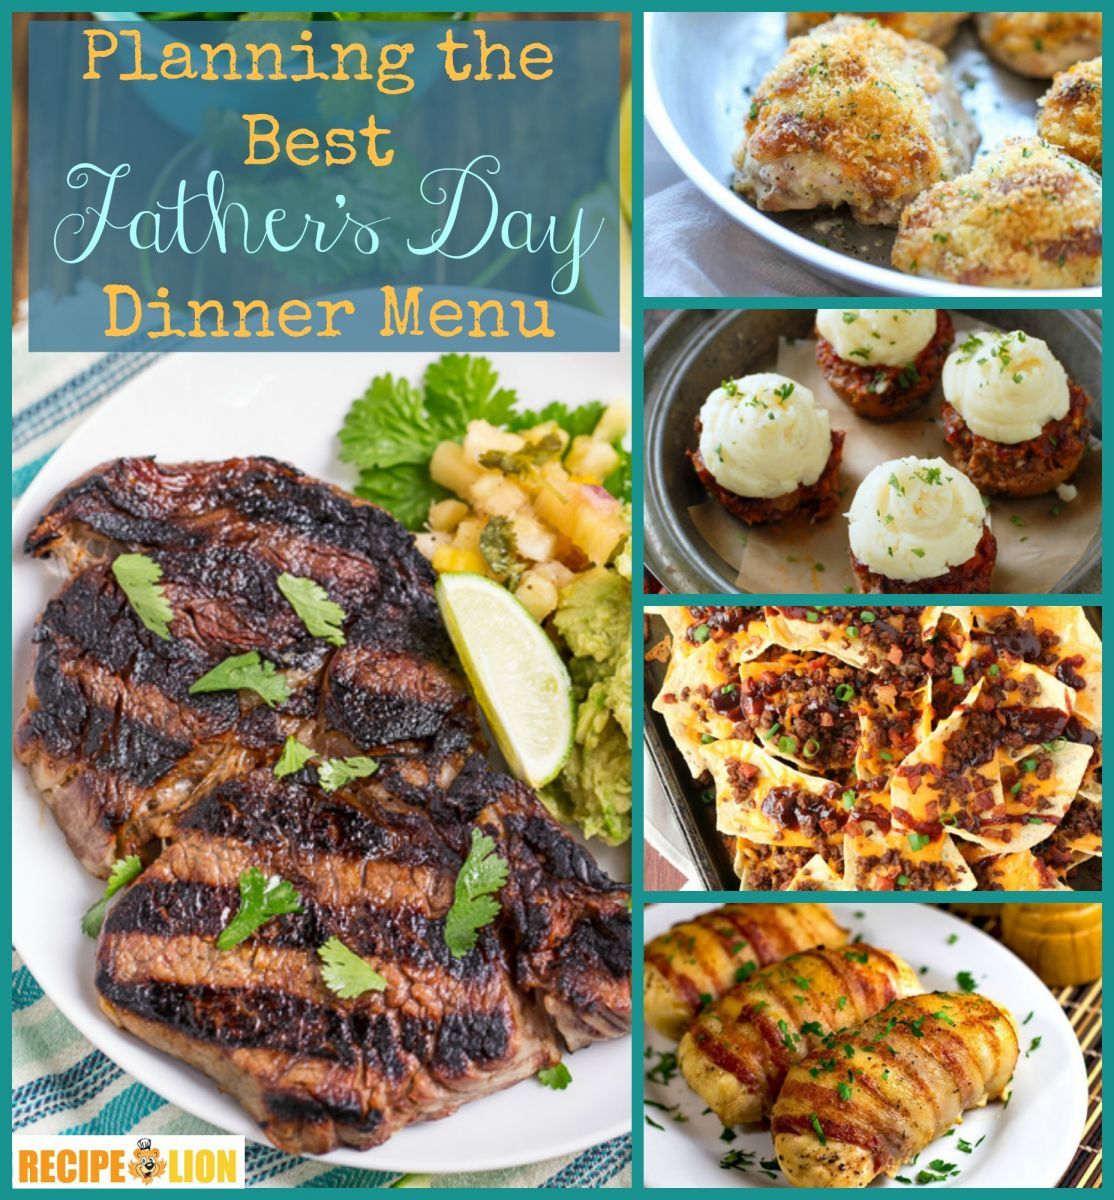 Easy Dinner Recipes for Father's Day | My dad will love all of these